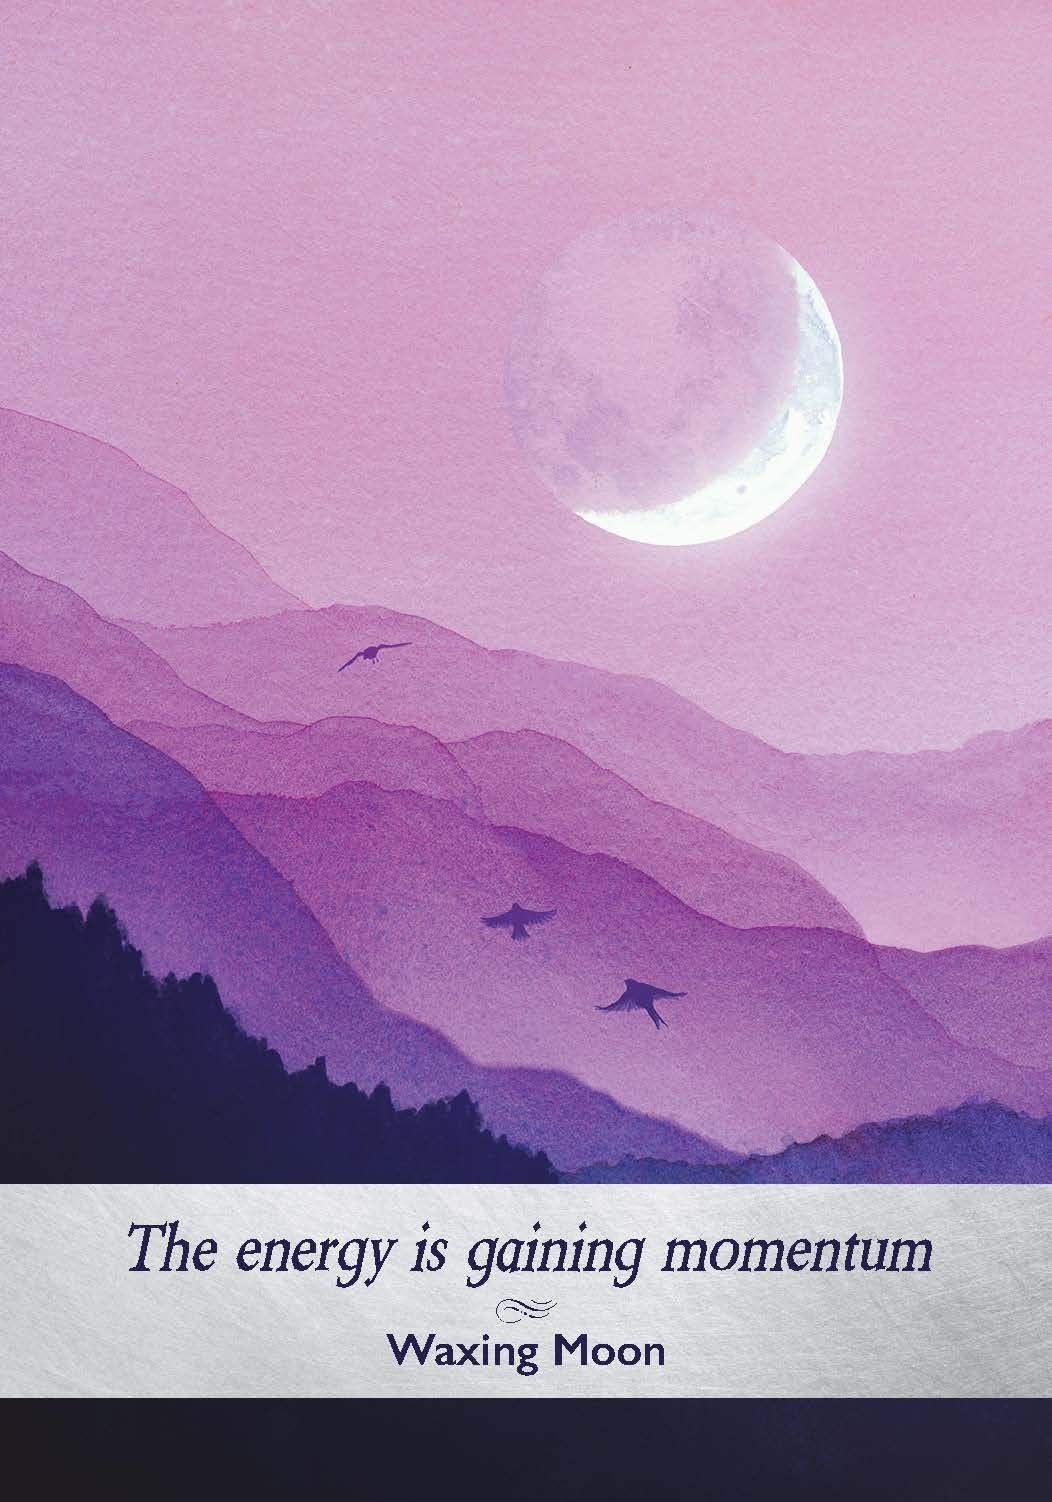 Moonology Oracle Card